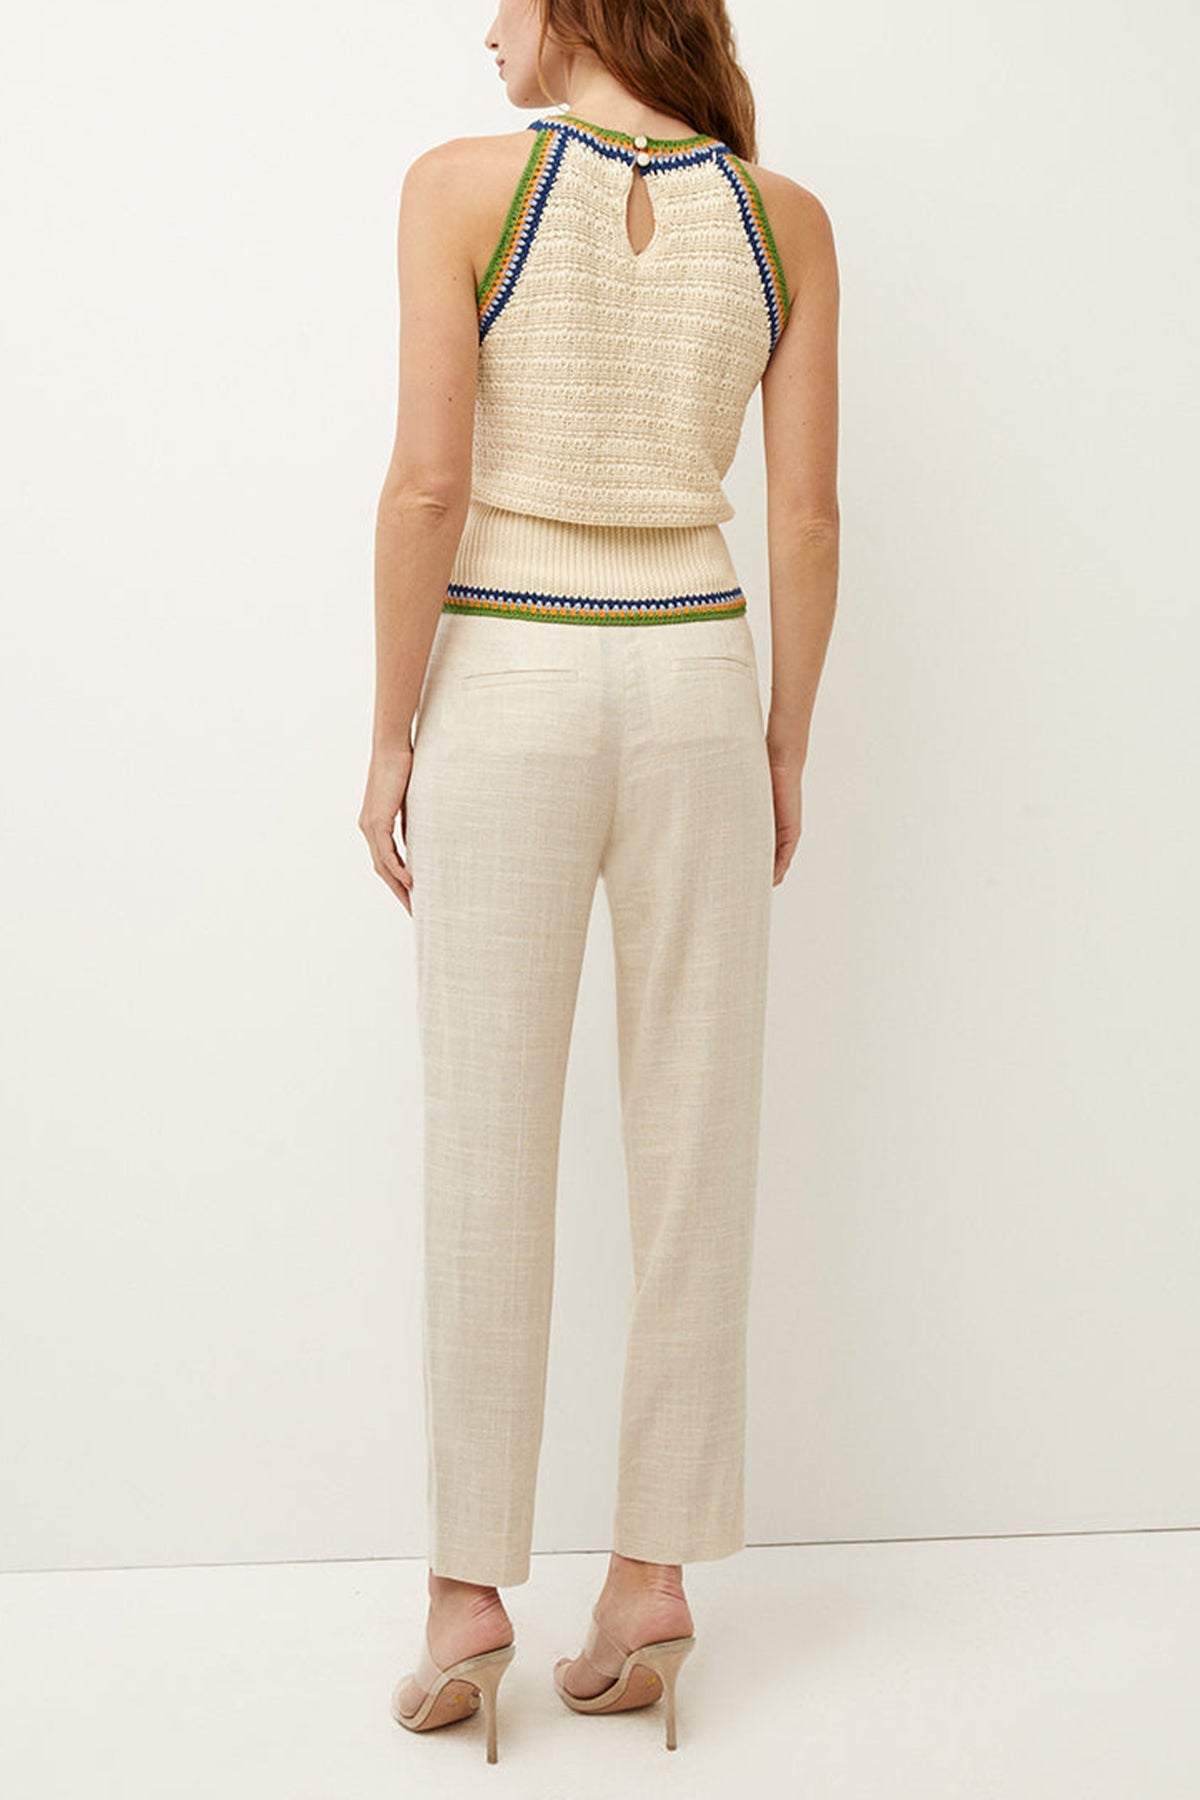 Zelly Metallic-Line Pant in Silver - shop-olivia.com